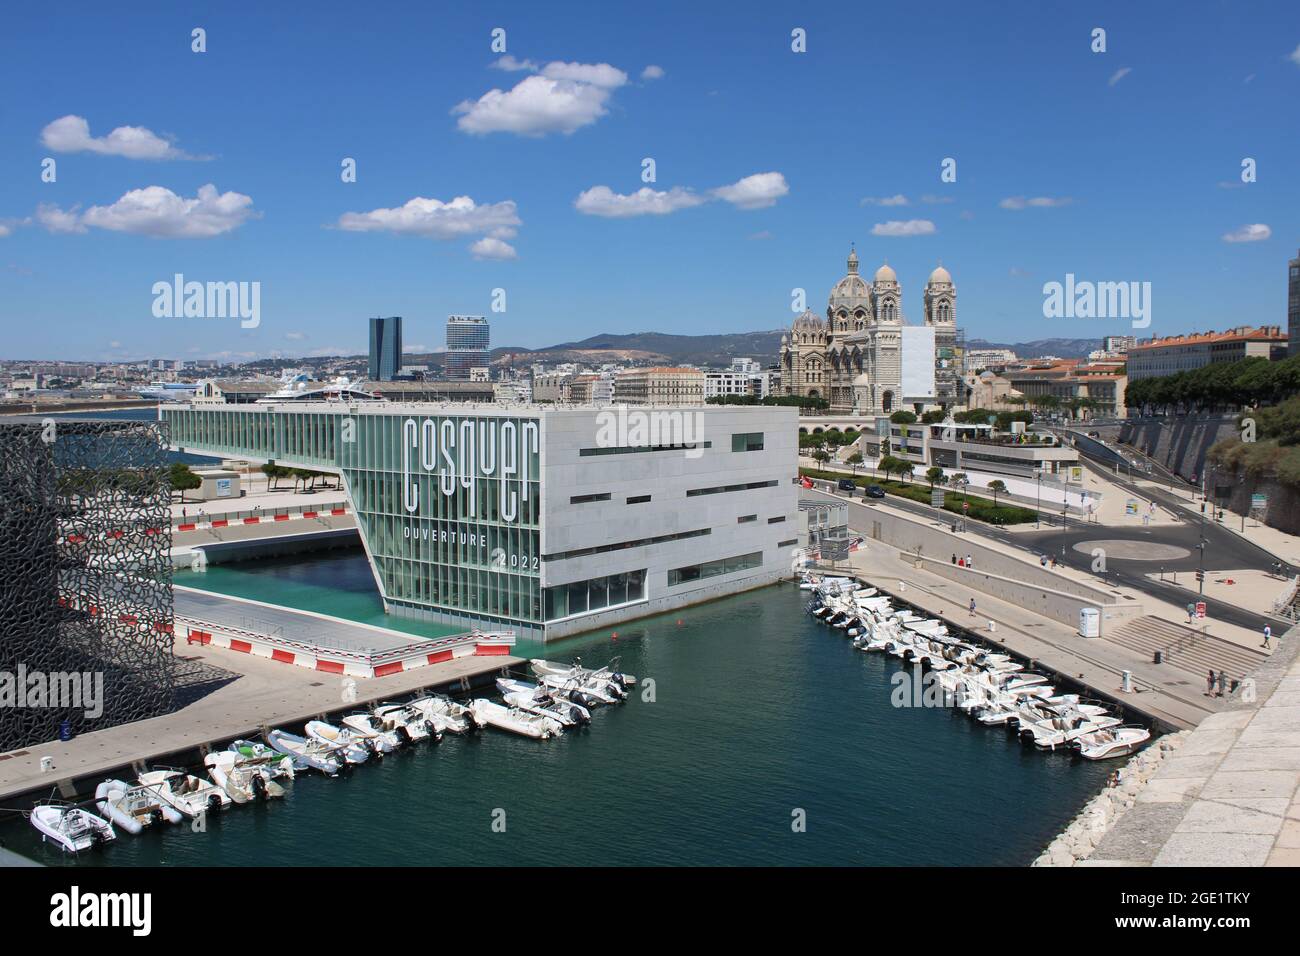 View of Mucem & future building replica of the Cosquer cave, Villa Mediterranée, cathedral La Major in the background, Marseille, France Stock Photo